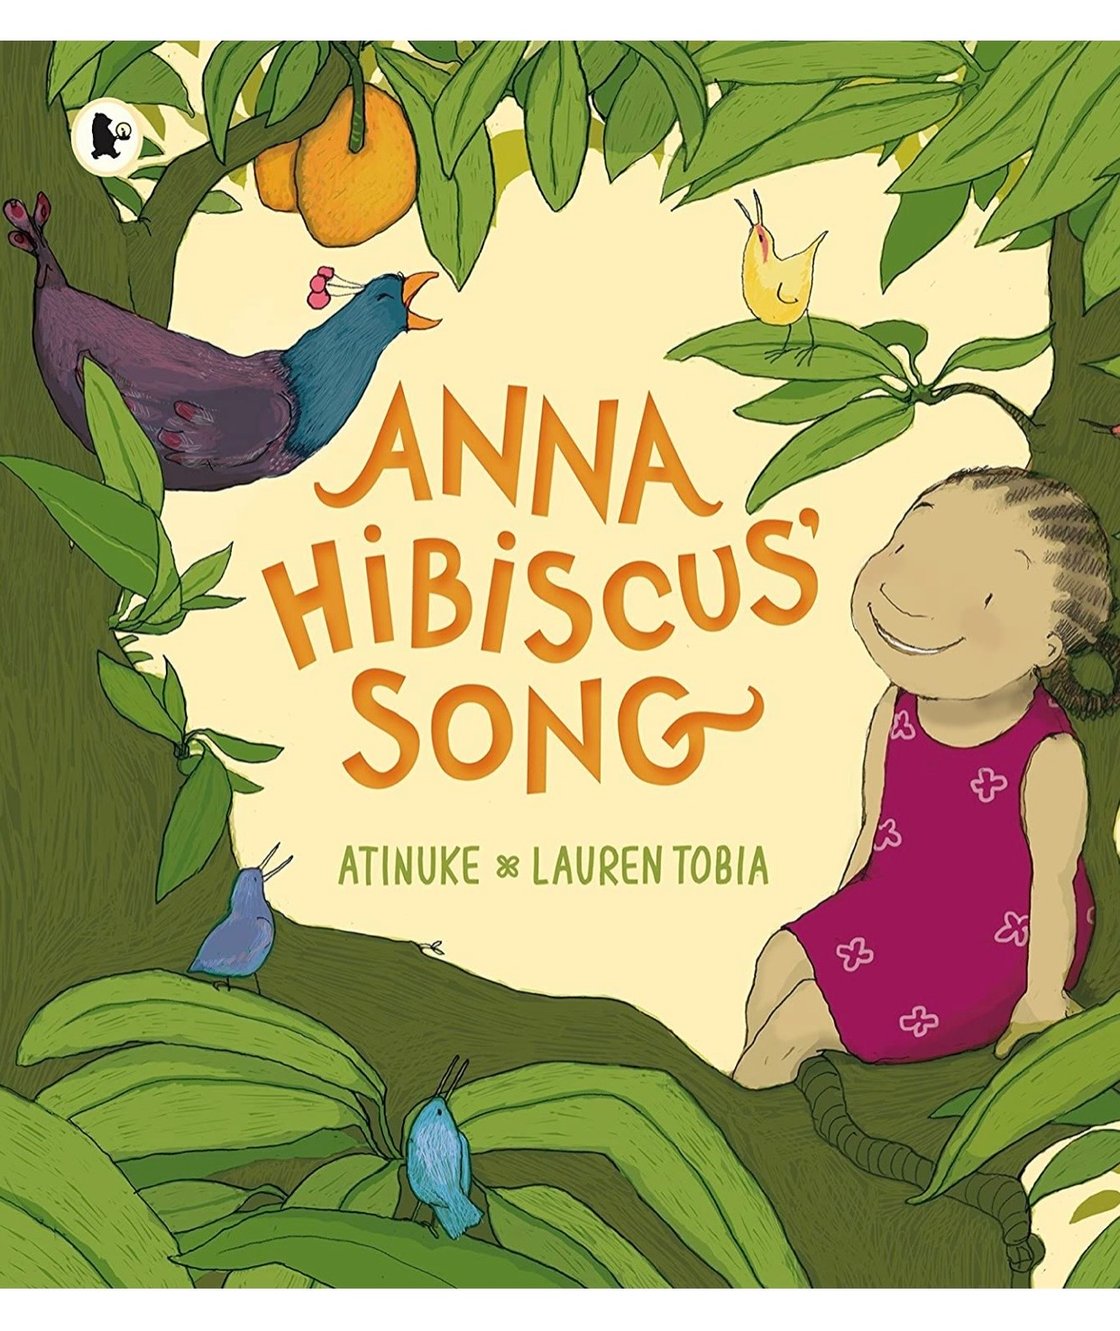 Image of Anna Hibiscus' Song